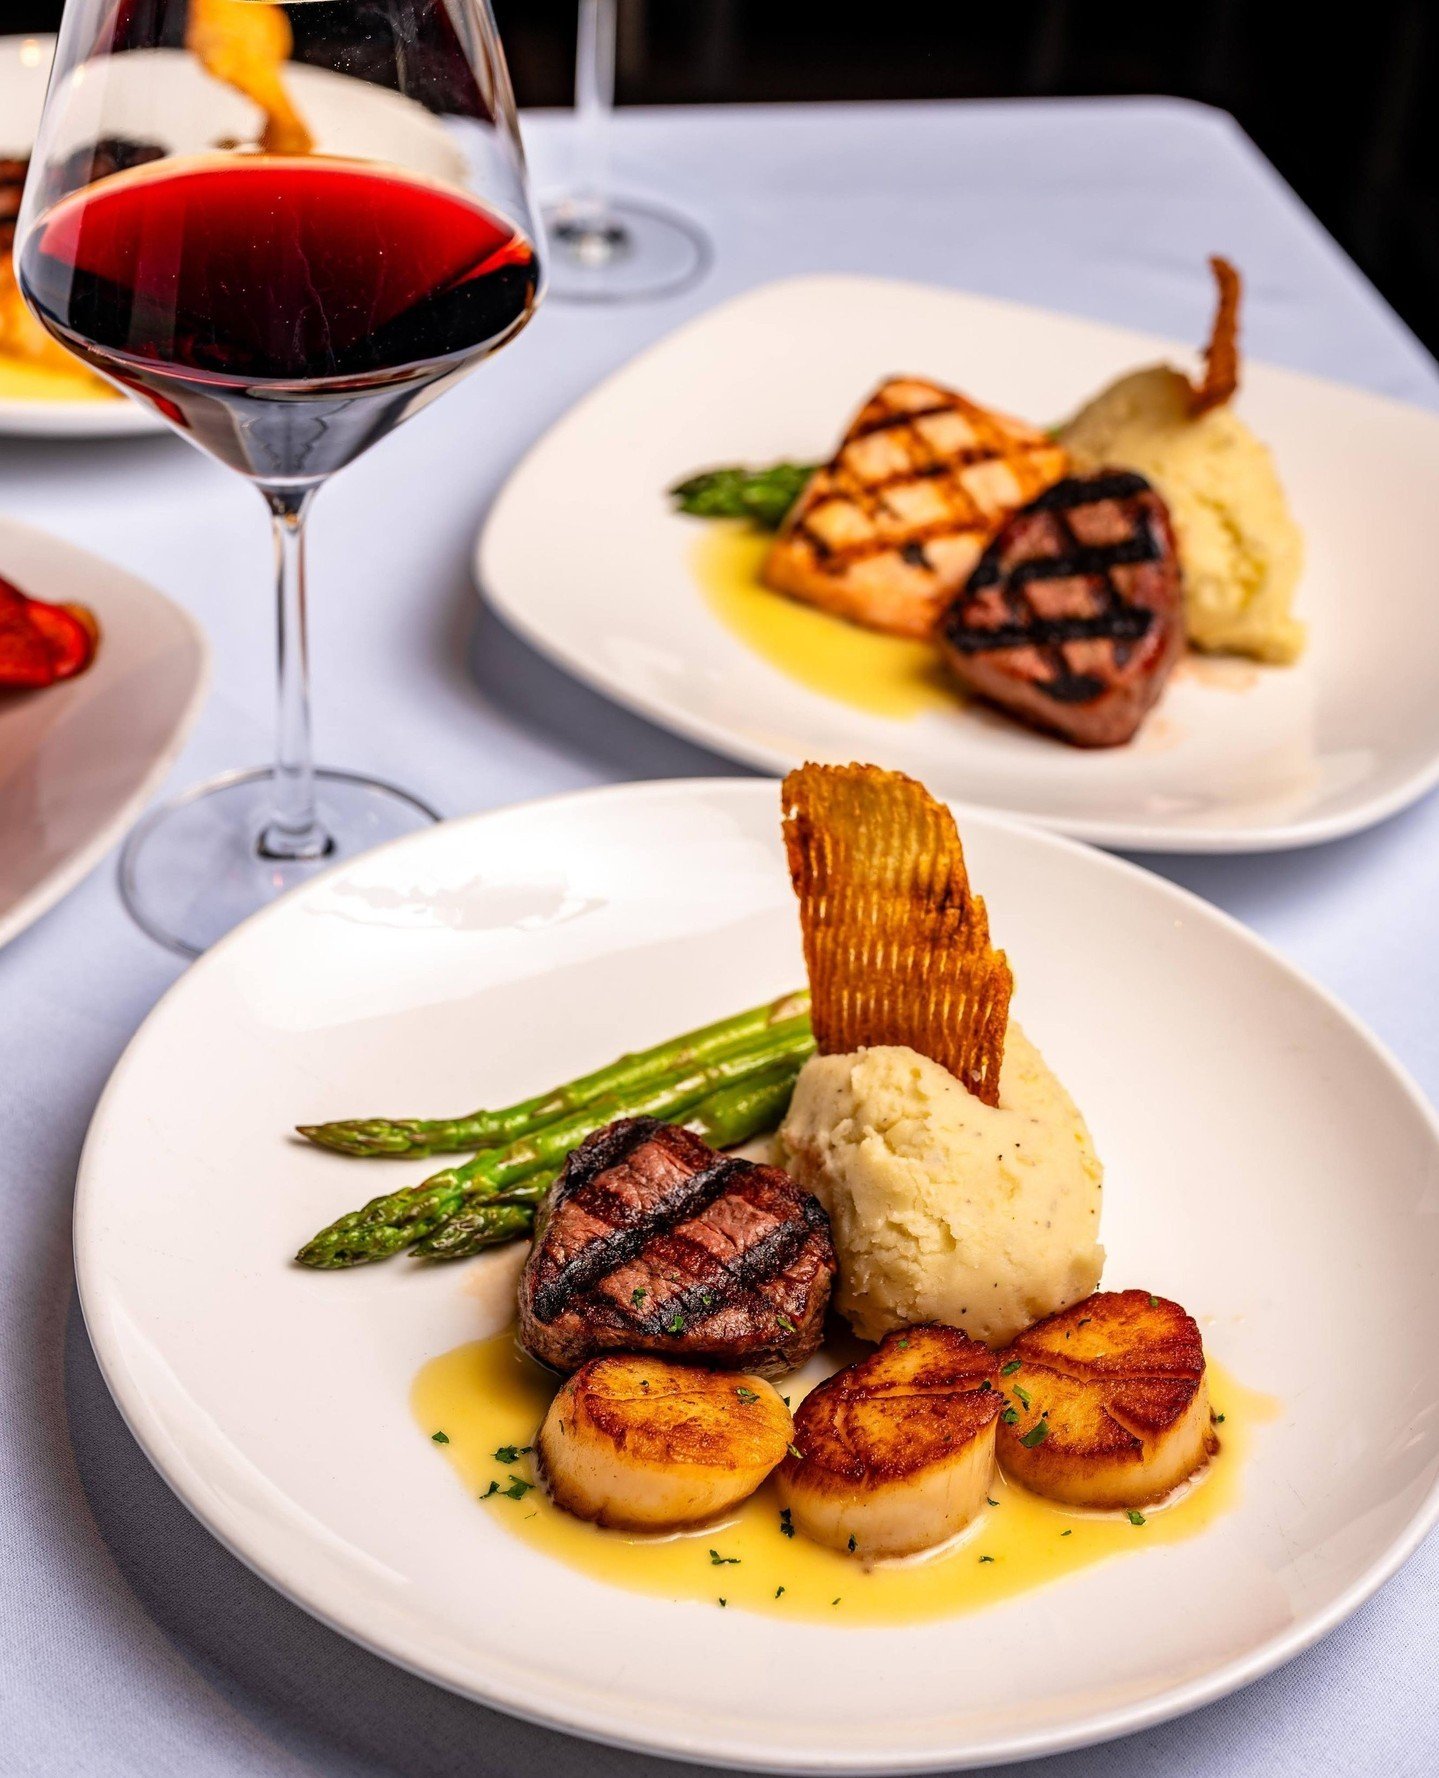 Steak and salmon?⁠
Or steak and scallops?⁠
⁠
Let us know which combo you'll be choosing to indulge in during our Mixed Grill Prix Fixe running through May!